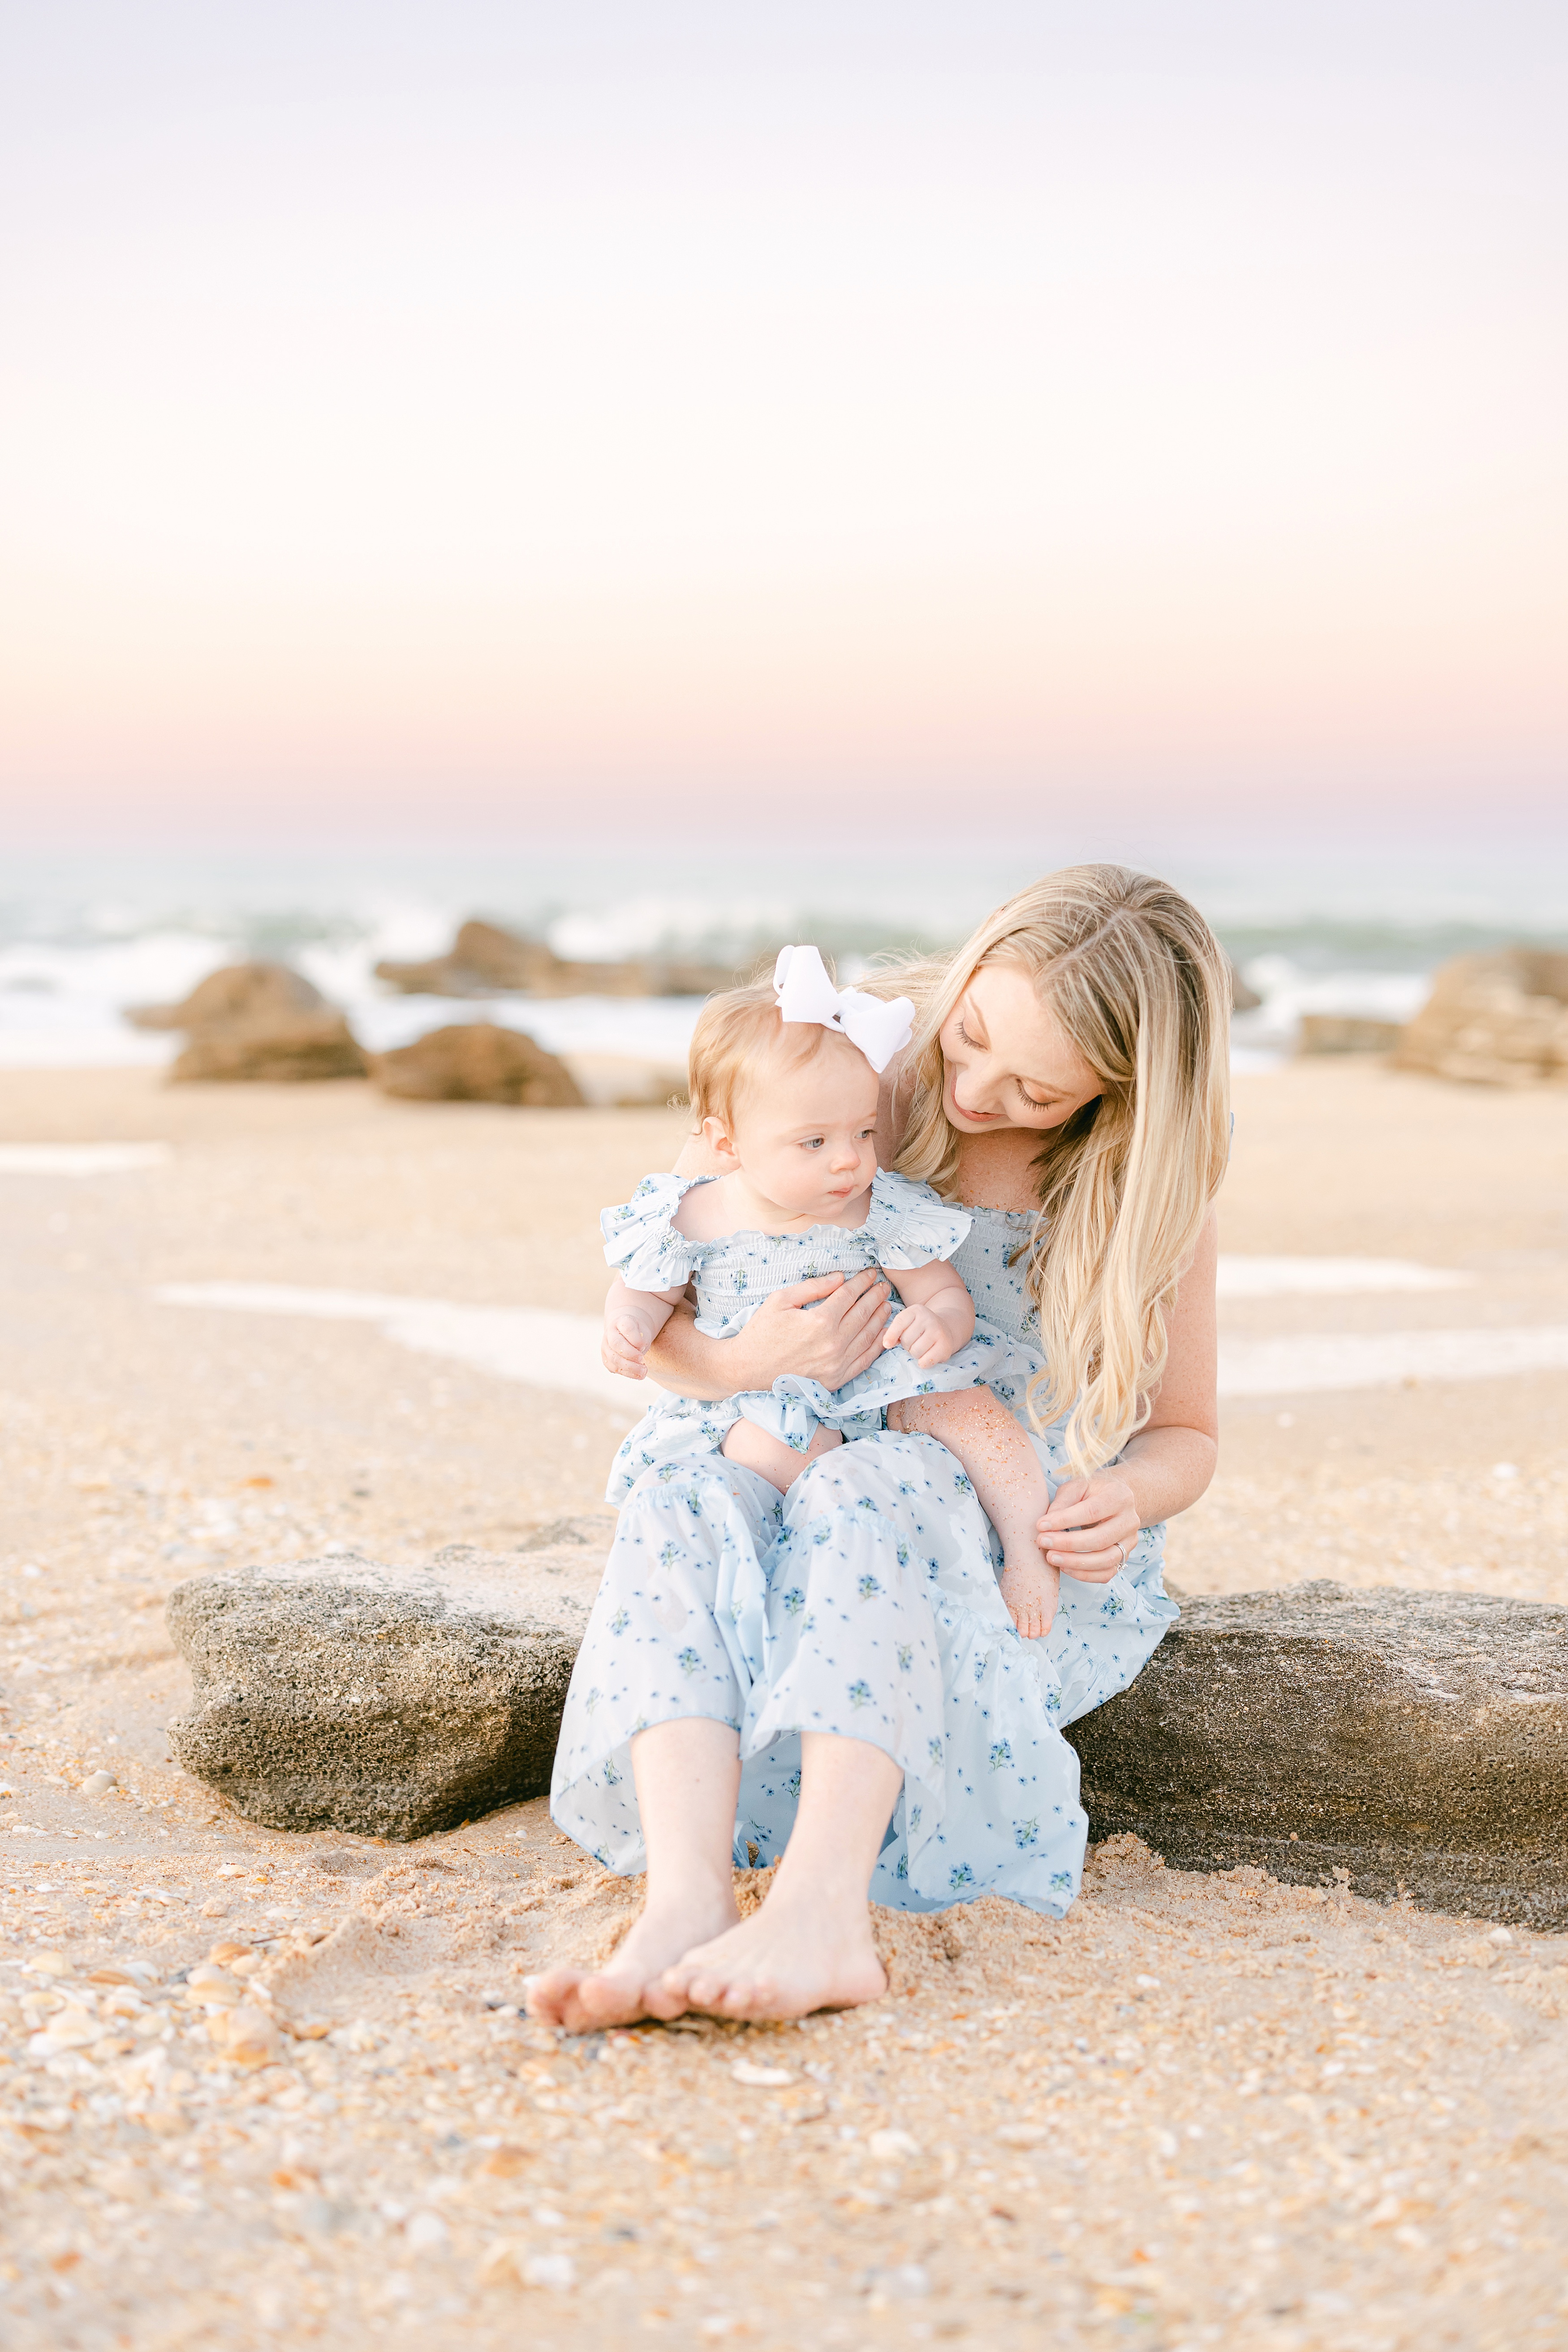 pastel sunset beach portrait of woman and baby girl in pale blue dresses